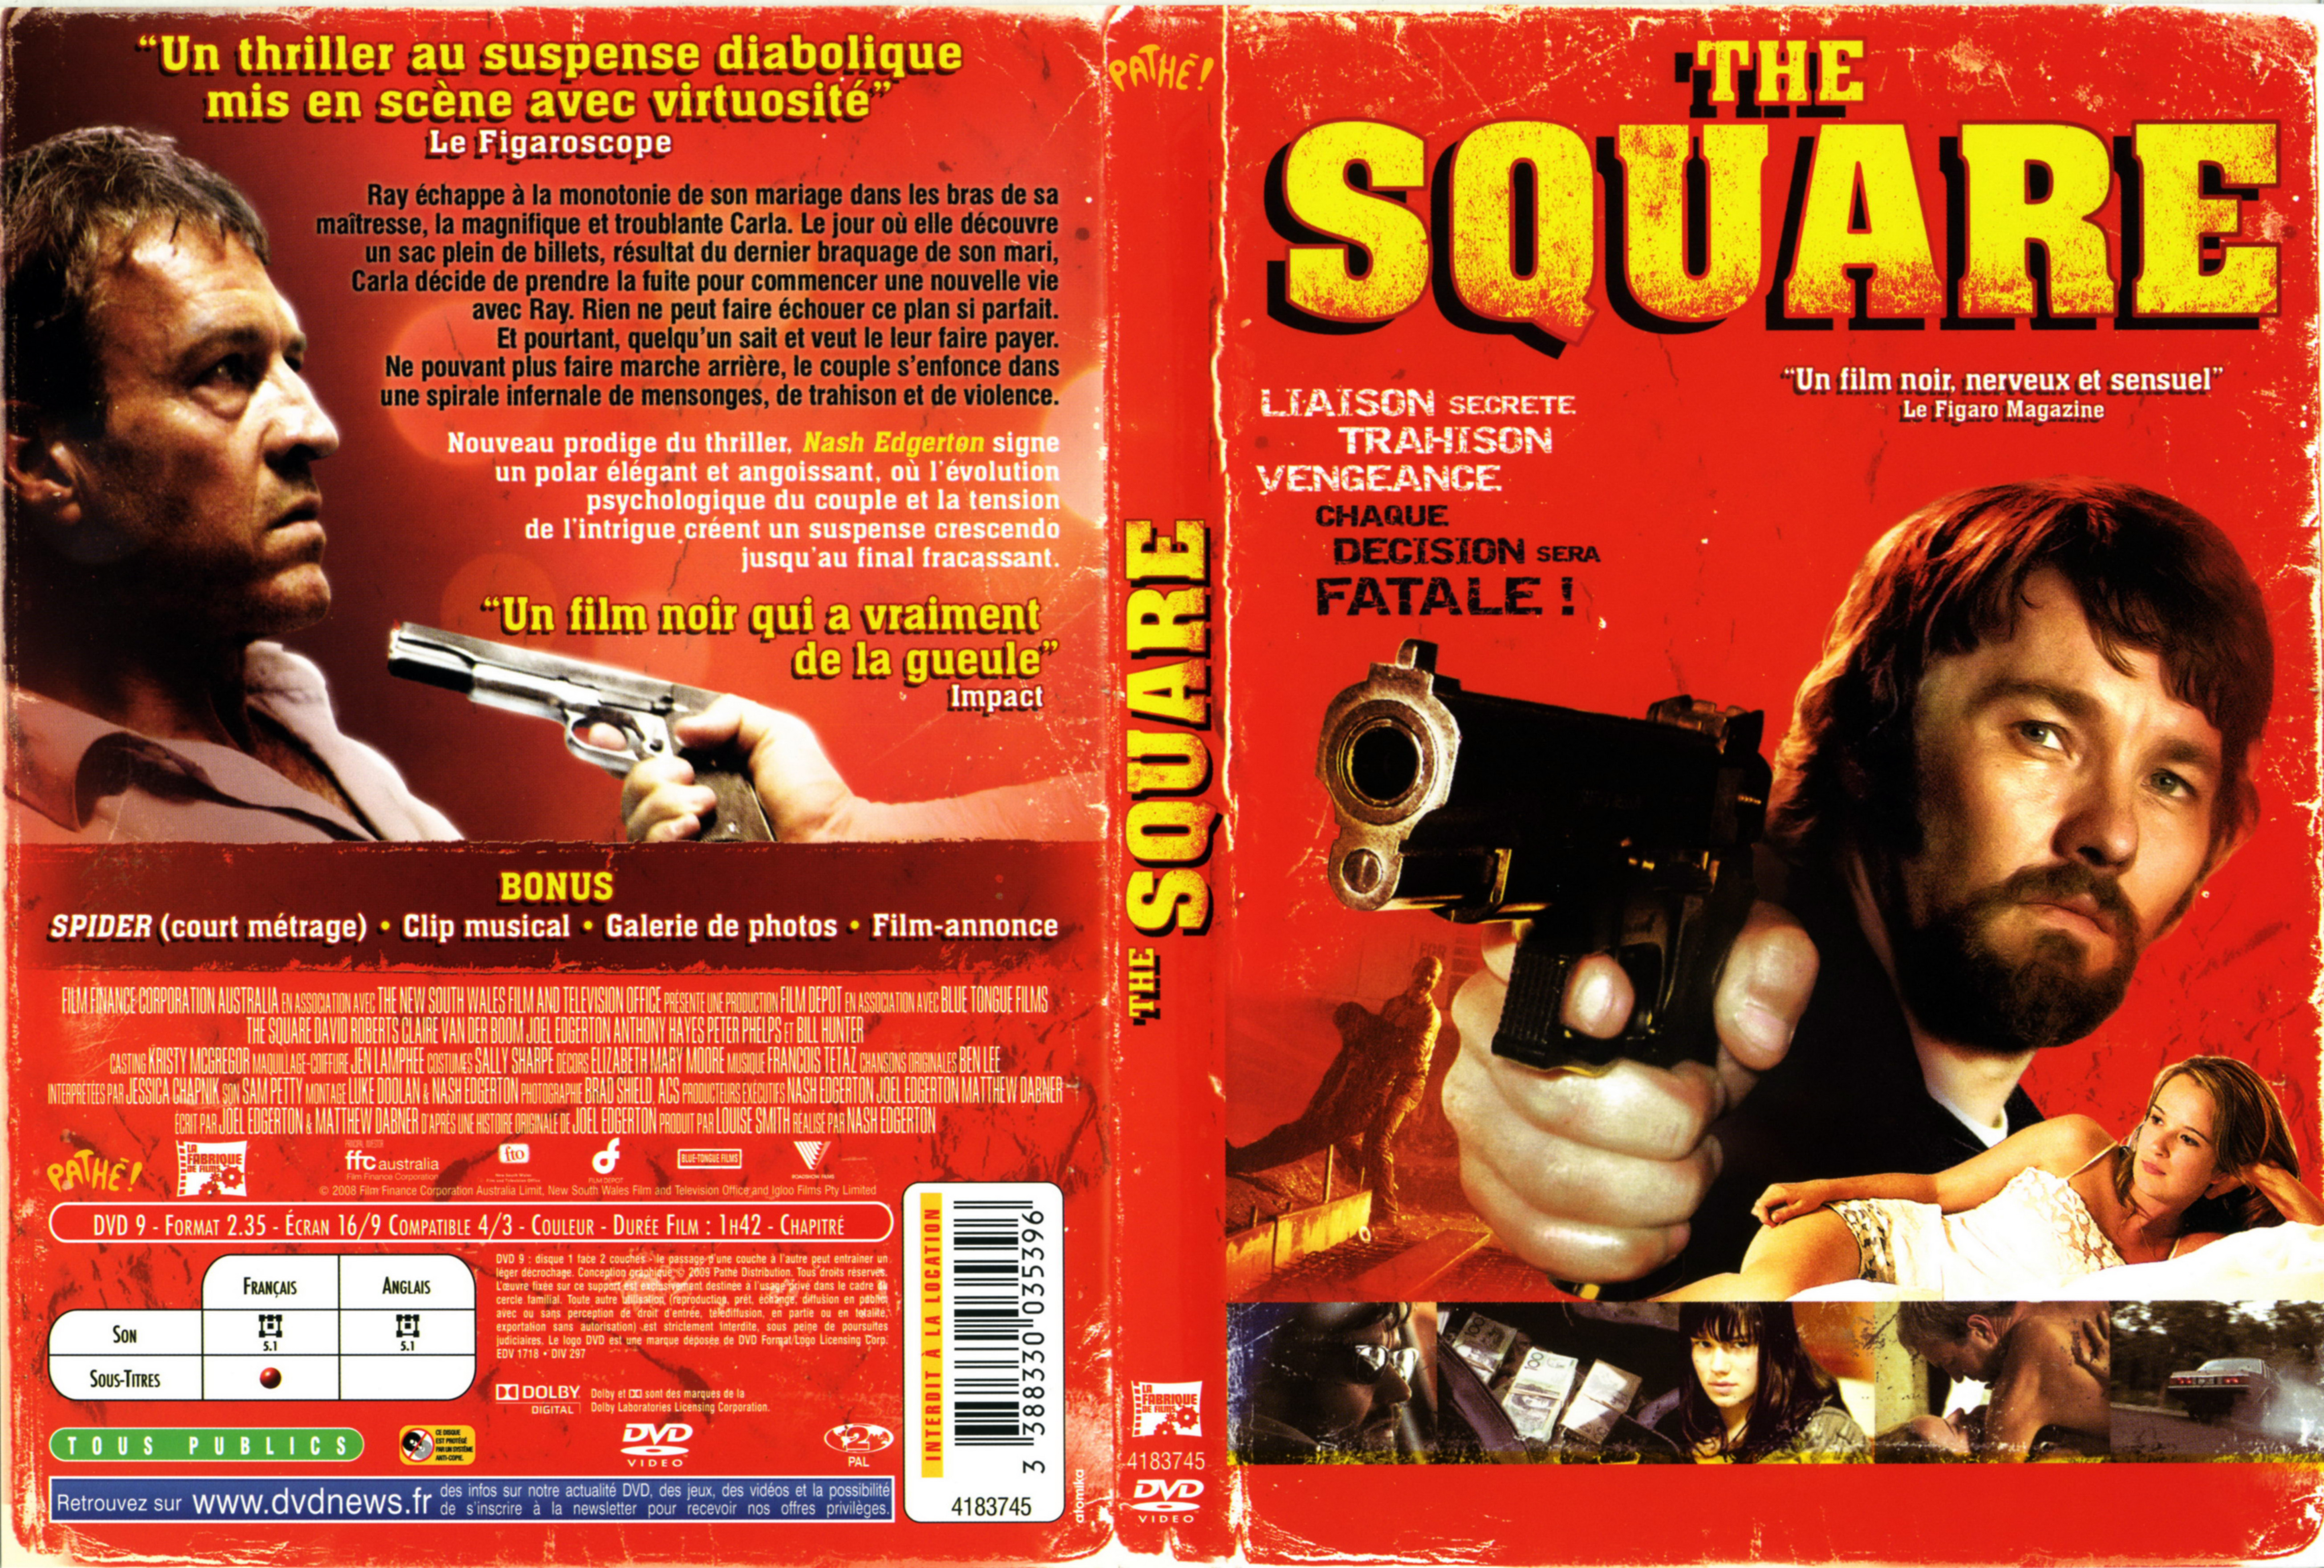 Jaquette DVD The square